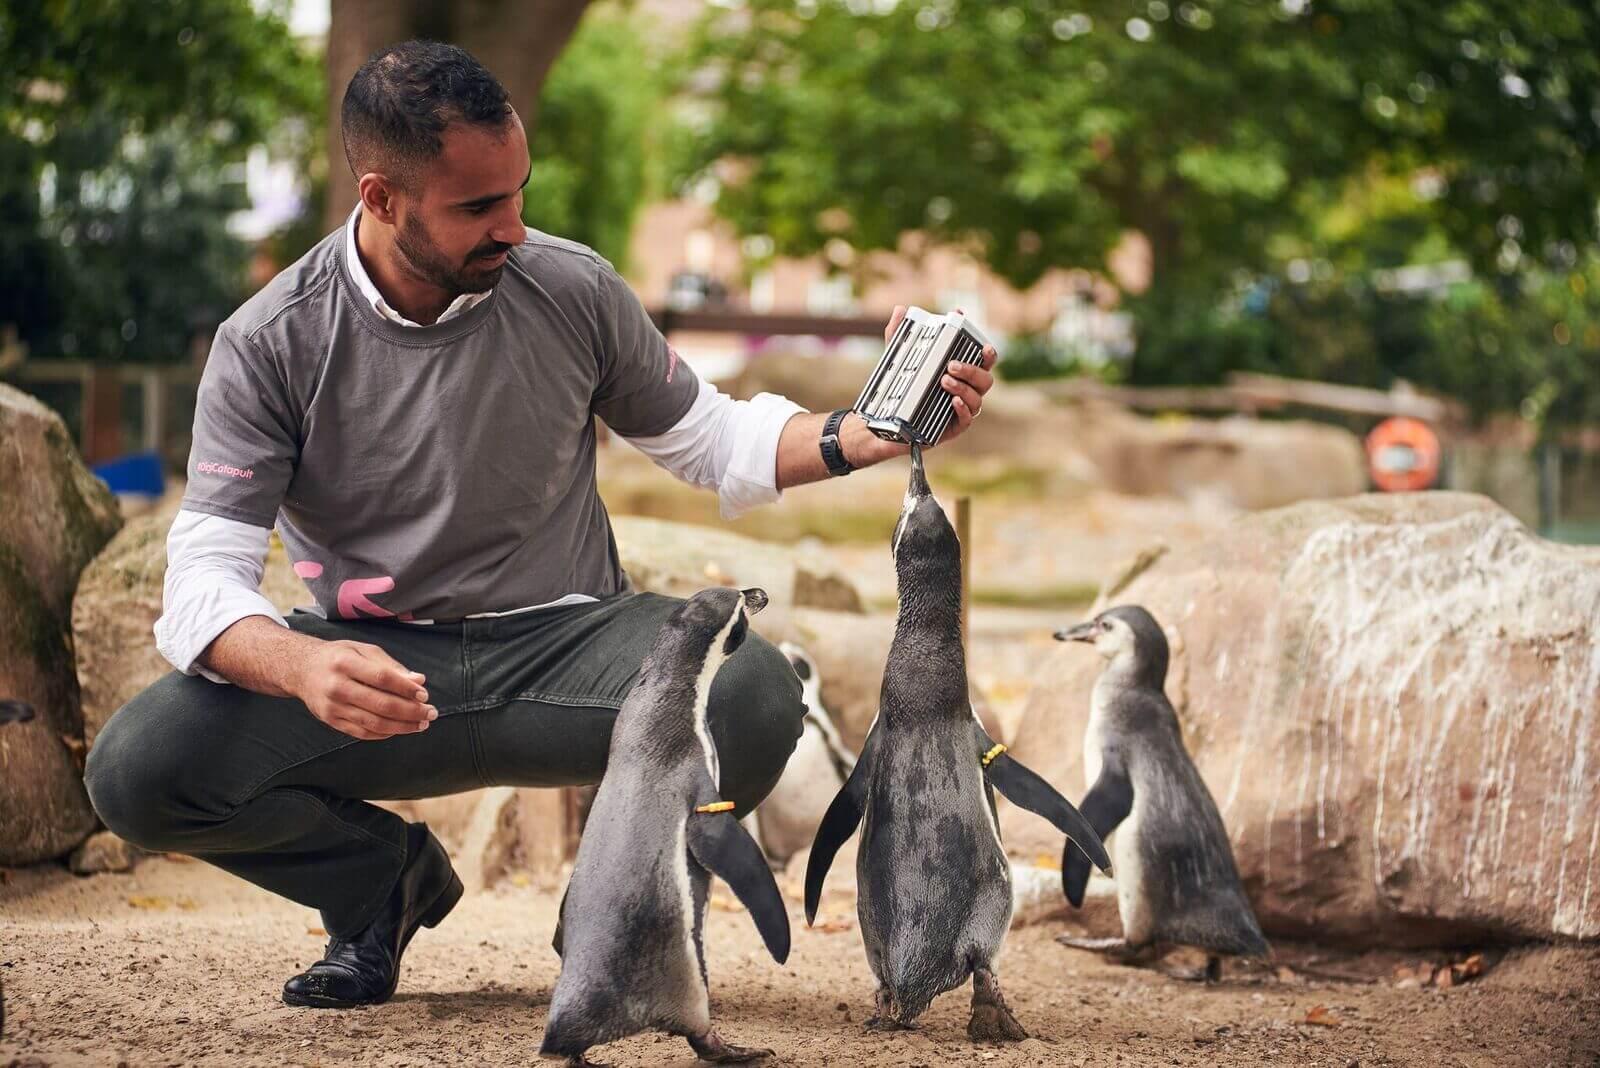 Interact with different species of birds like penguins at ZSL